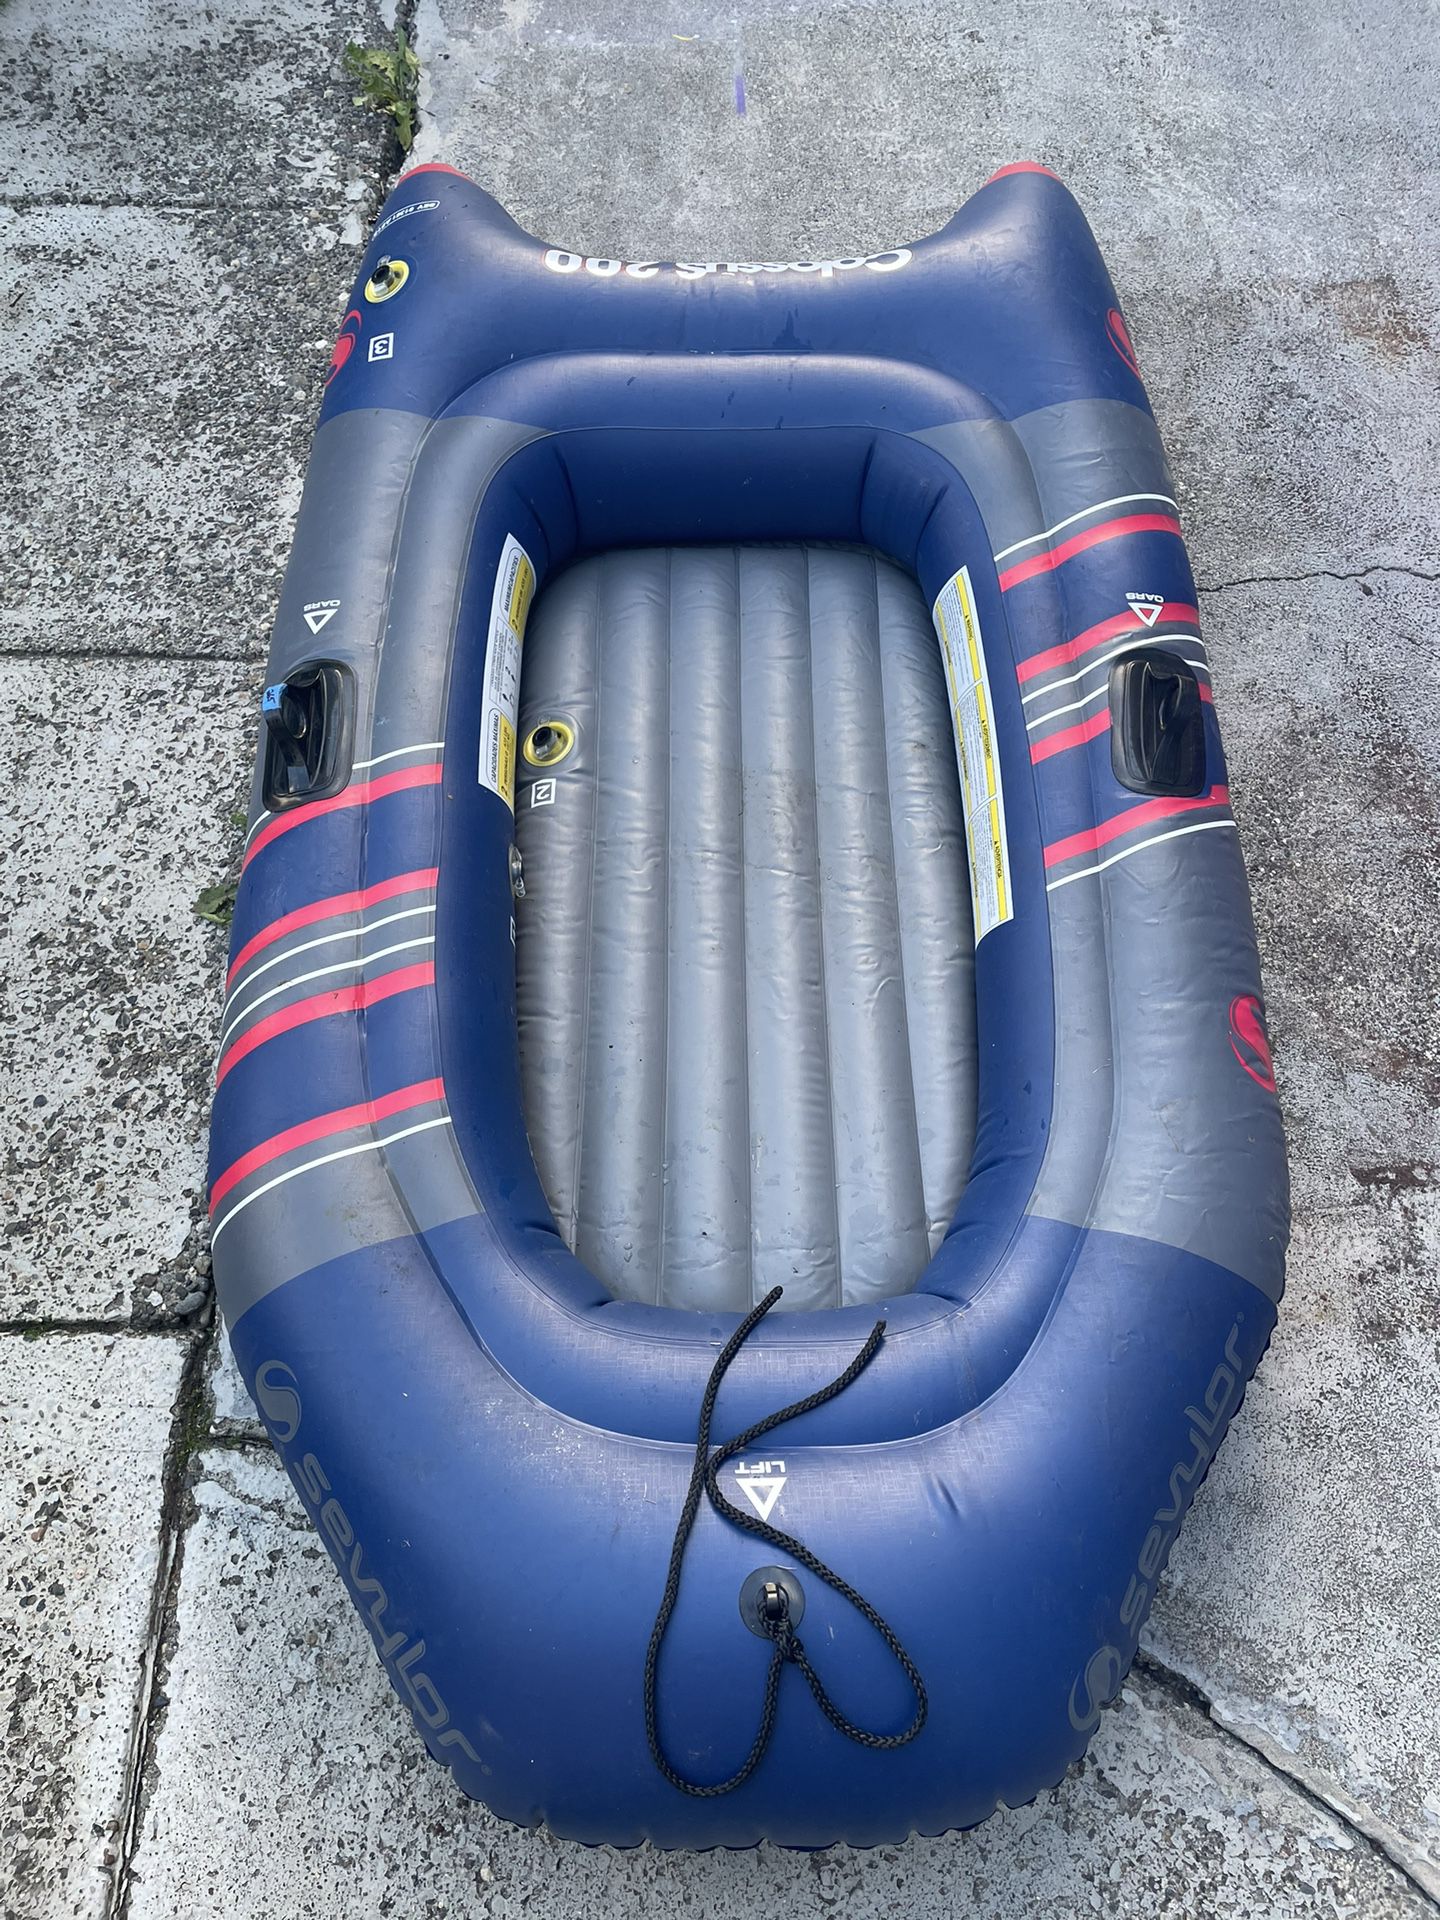 Sevylor Colossus 200 Inflatable Boat